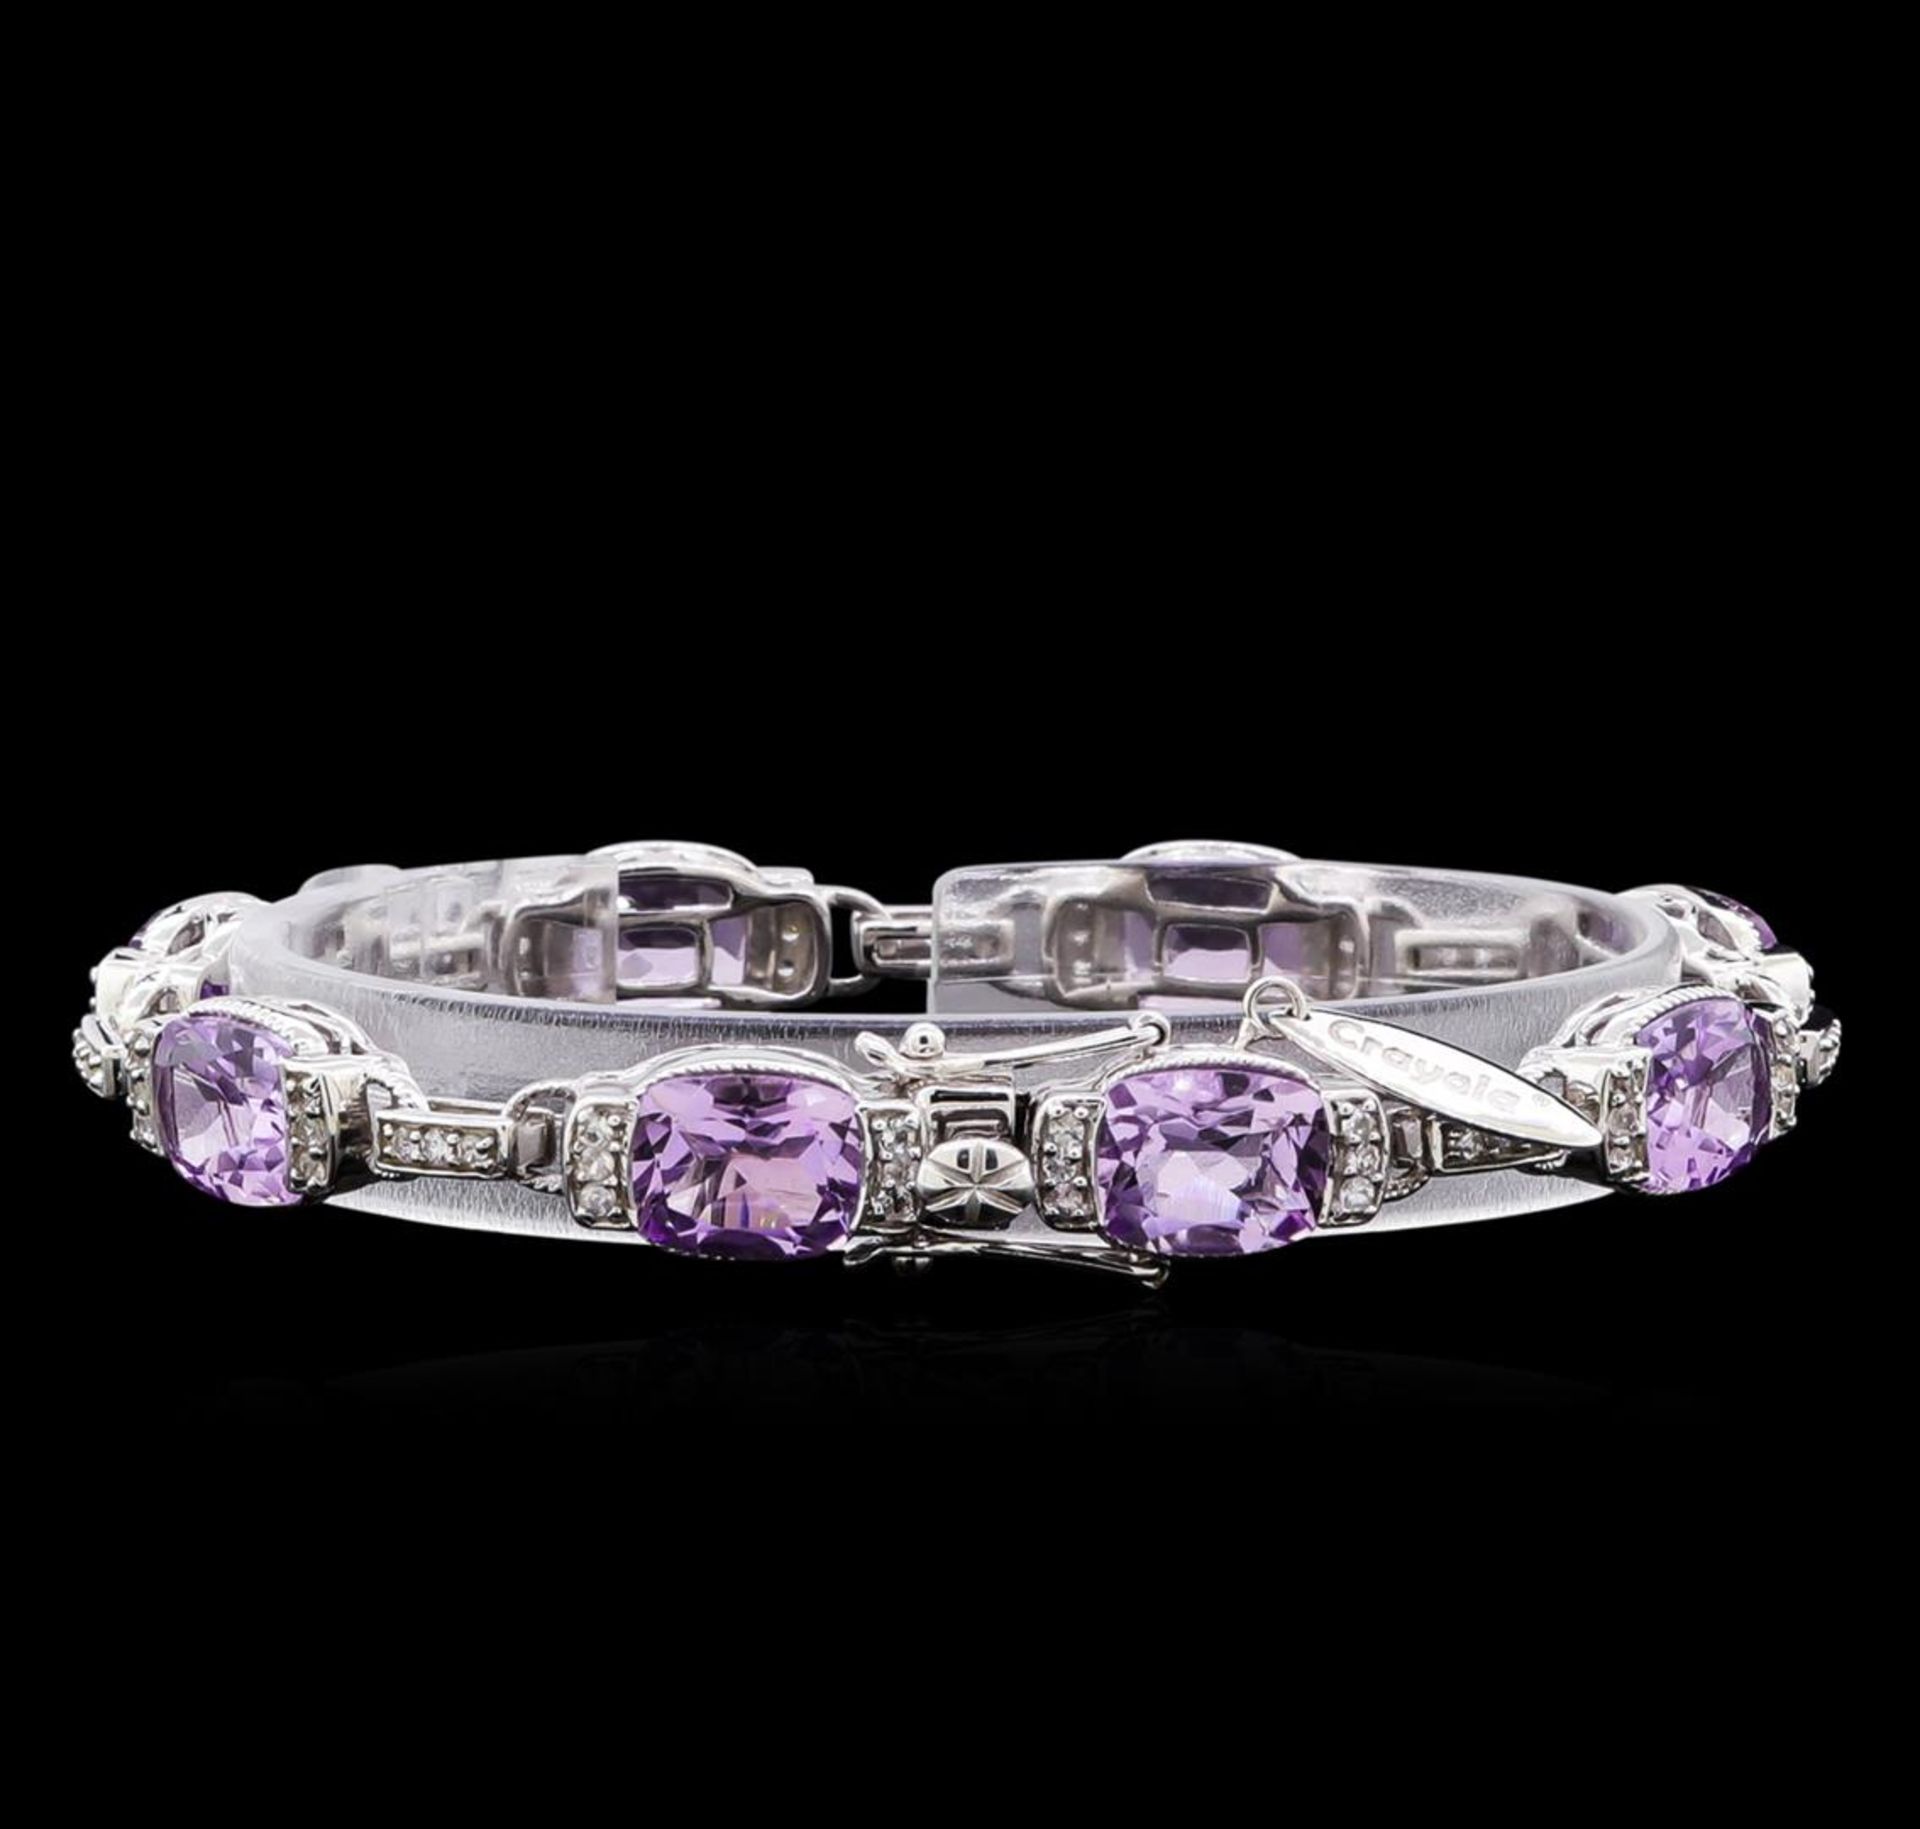 Crayola 17.00 ctw Pink Amethyst and White Sapphire Bracelet - .925 Silver - Image 2 of 3